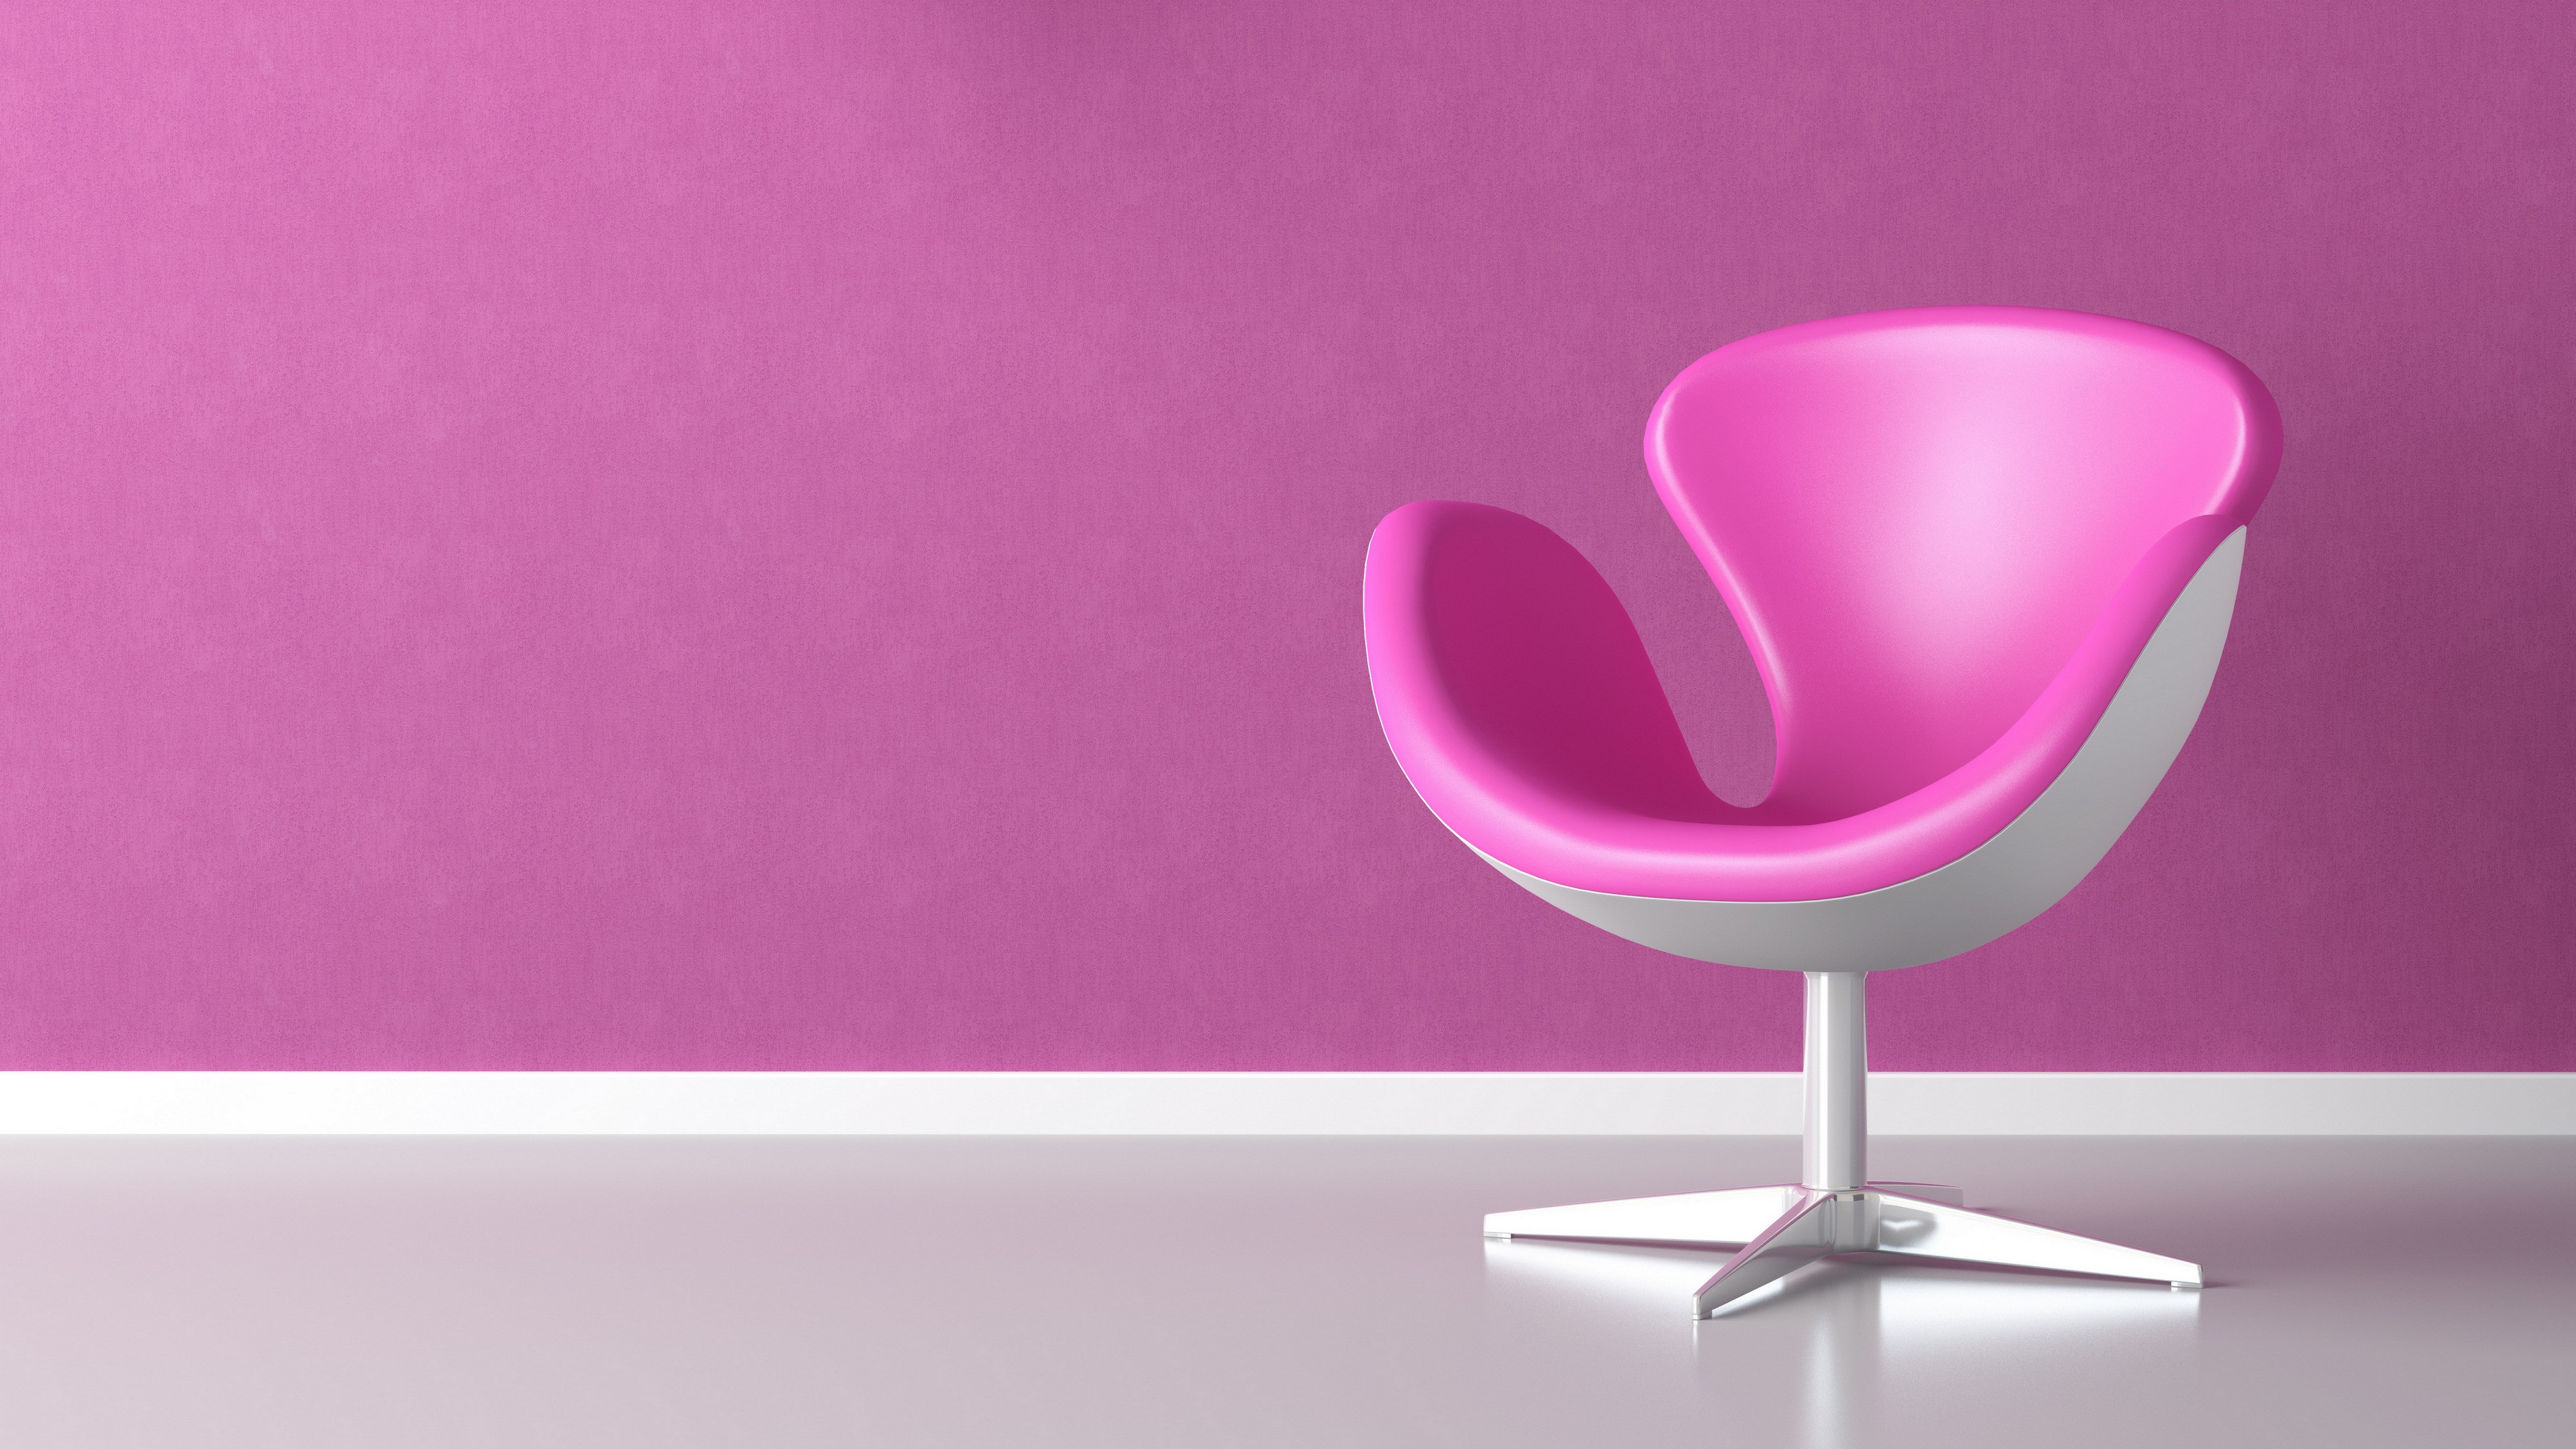 General 3800x2138 interior chair pink pink chair minimalism simple background wall